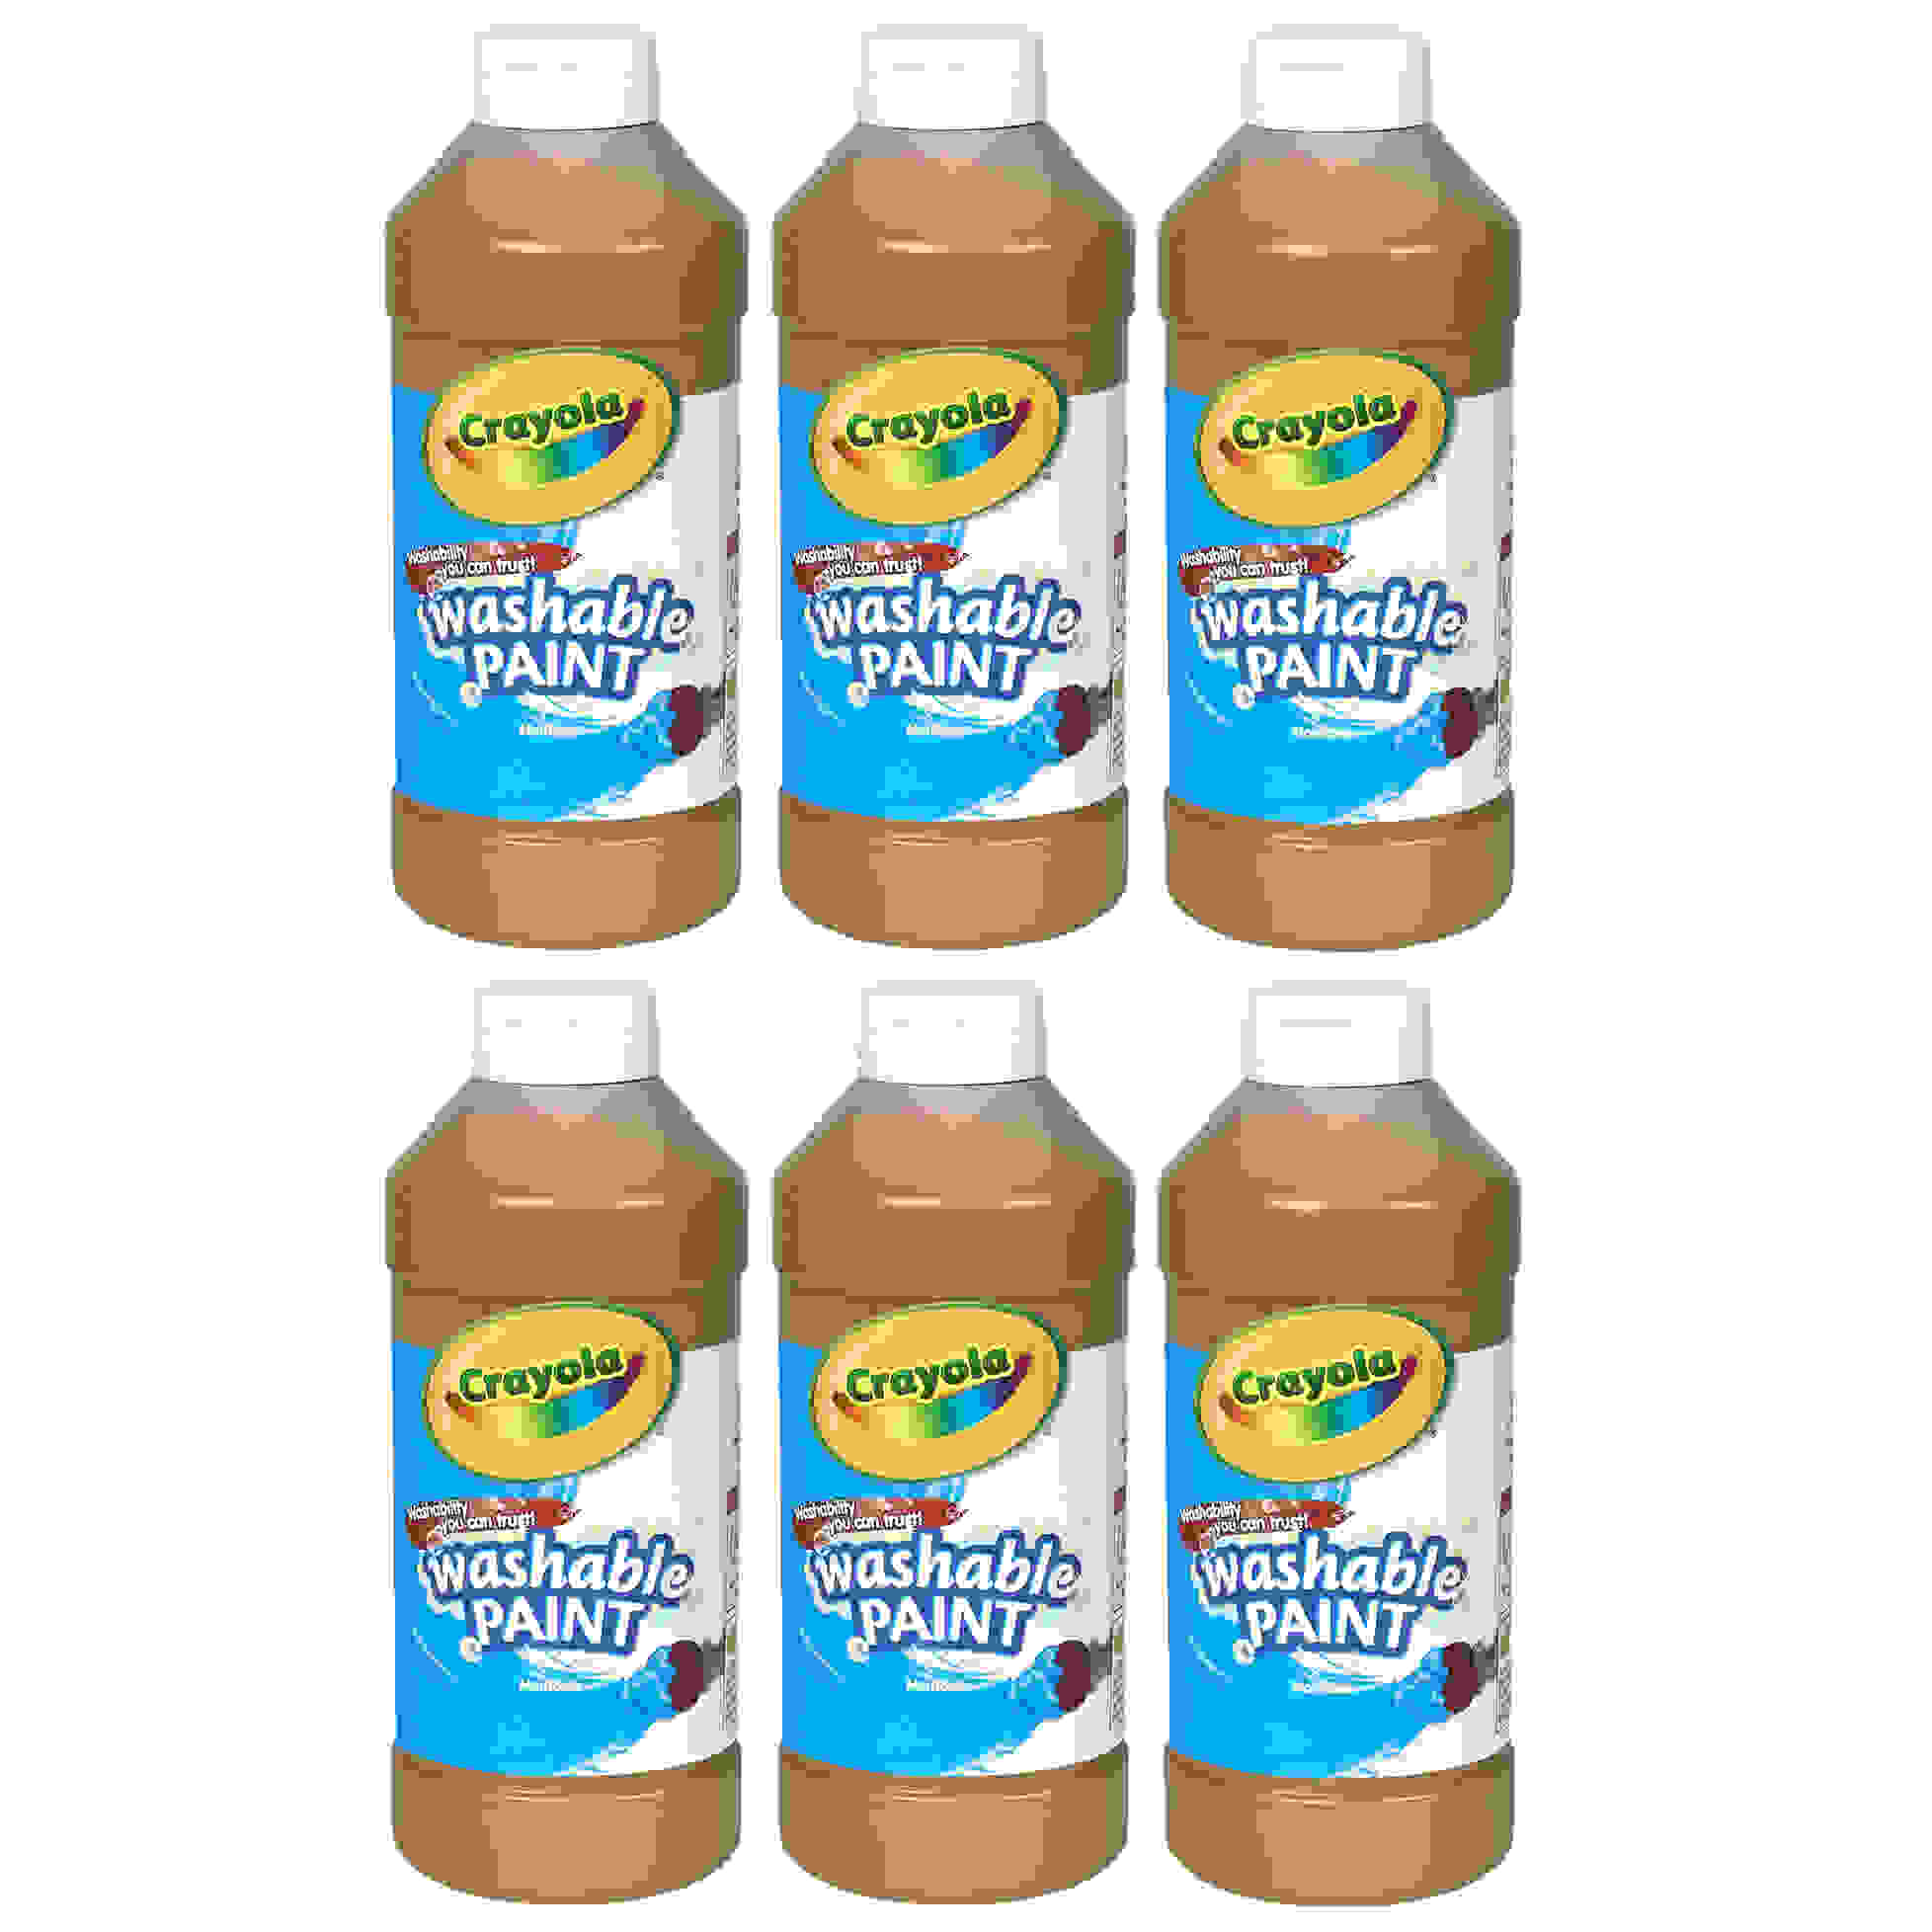 Washable Paint, Brown, 16 oz. Bottles, Pack of 6